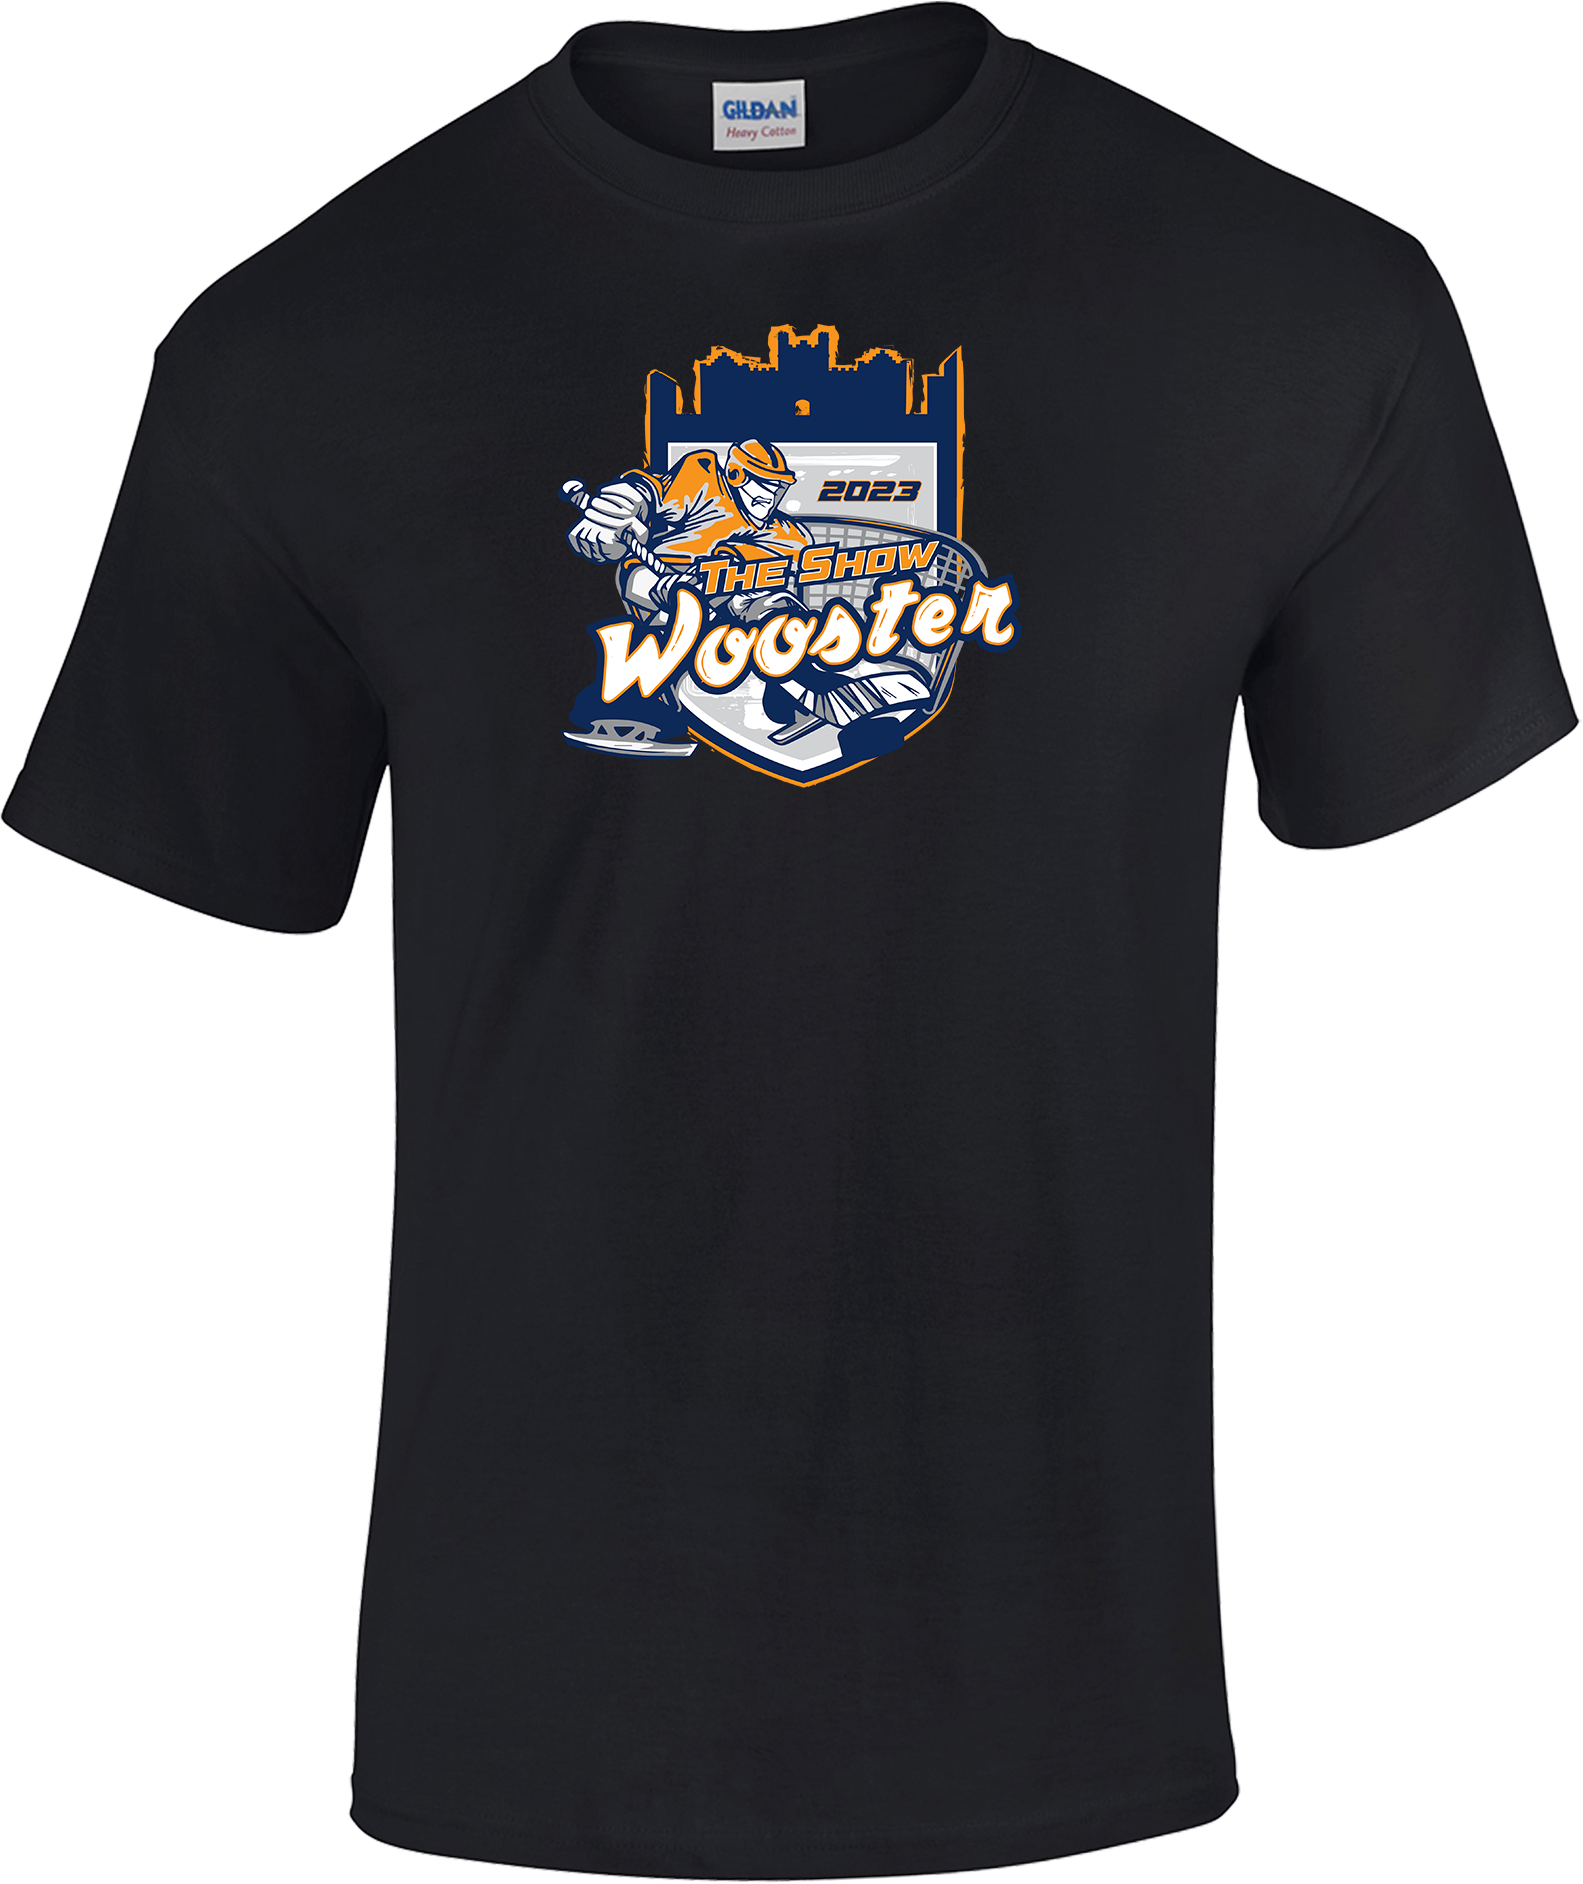 SHORT SLEEVES - 2023 The Show Wooster